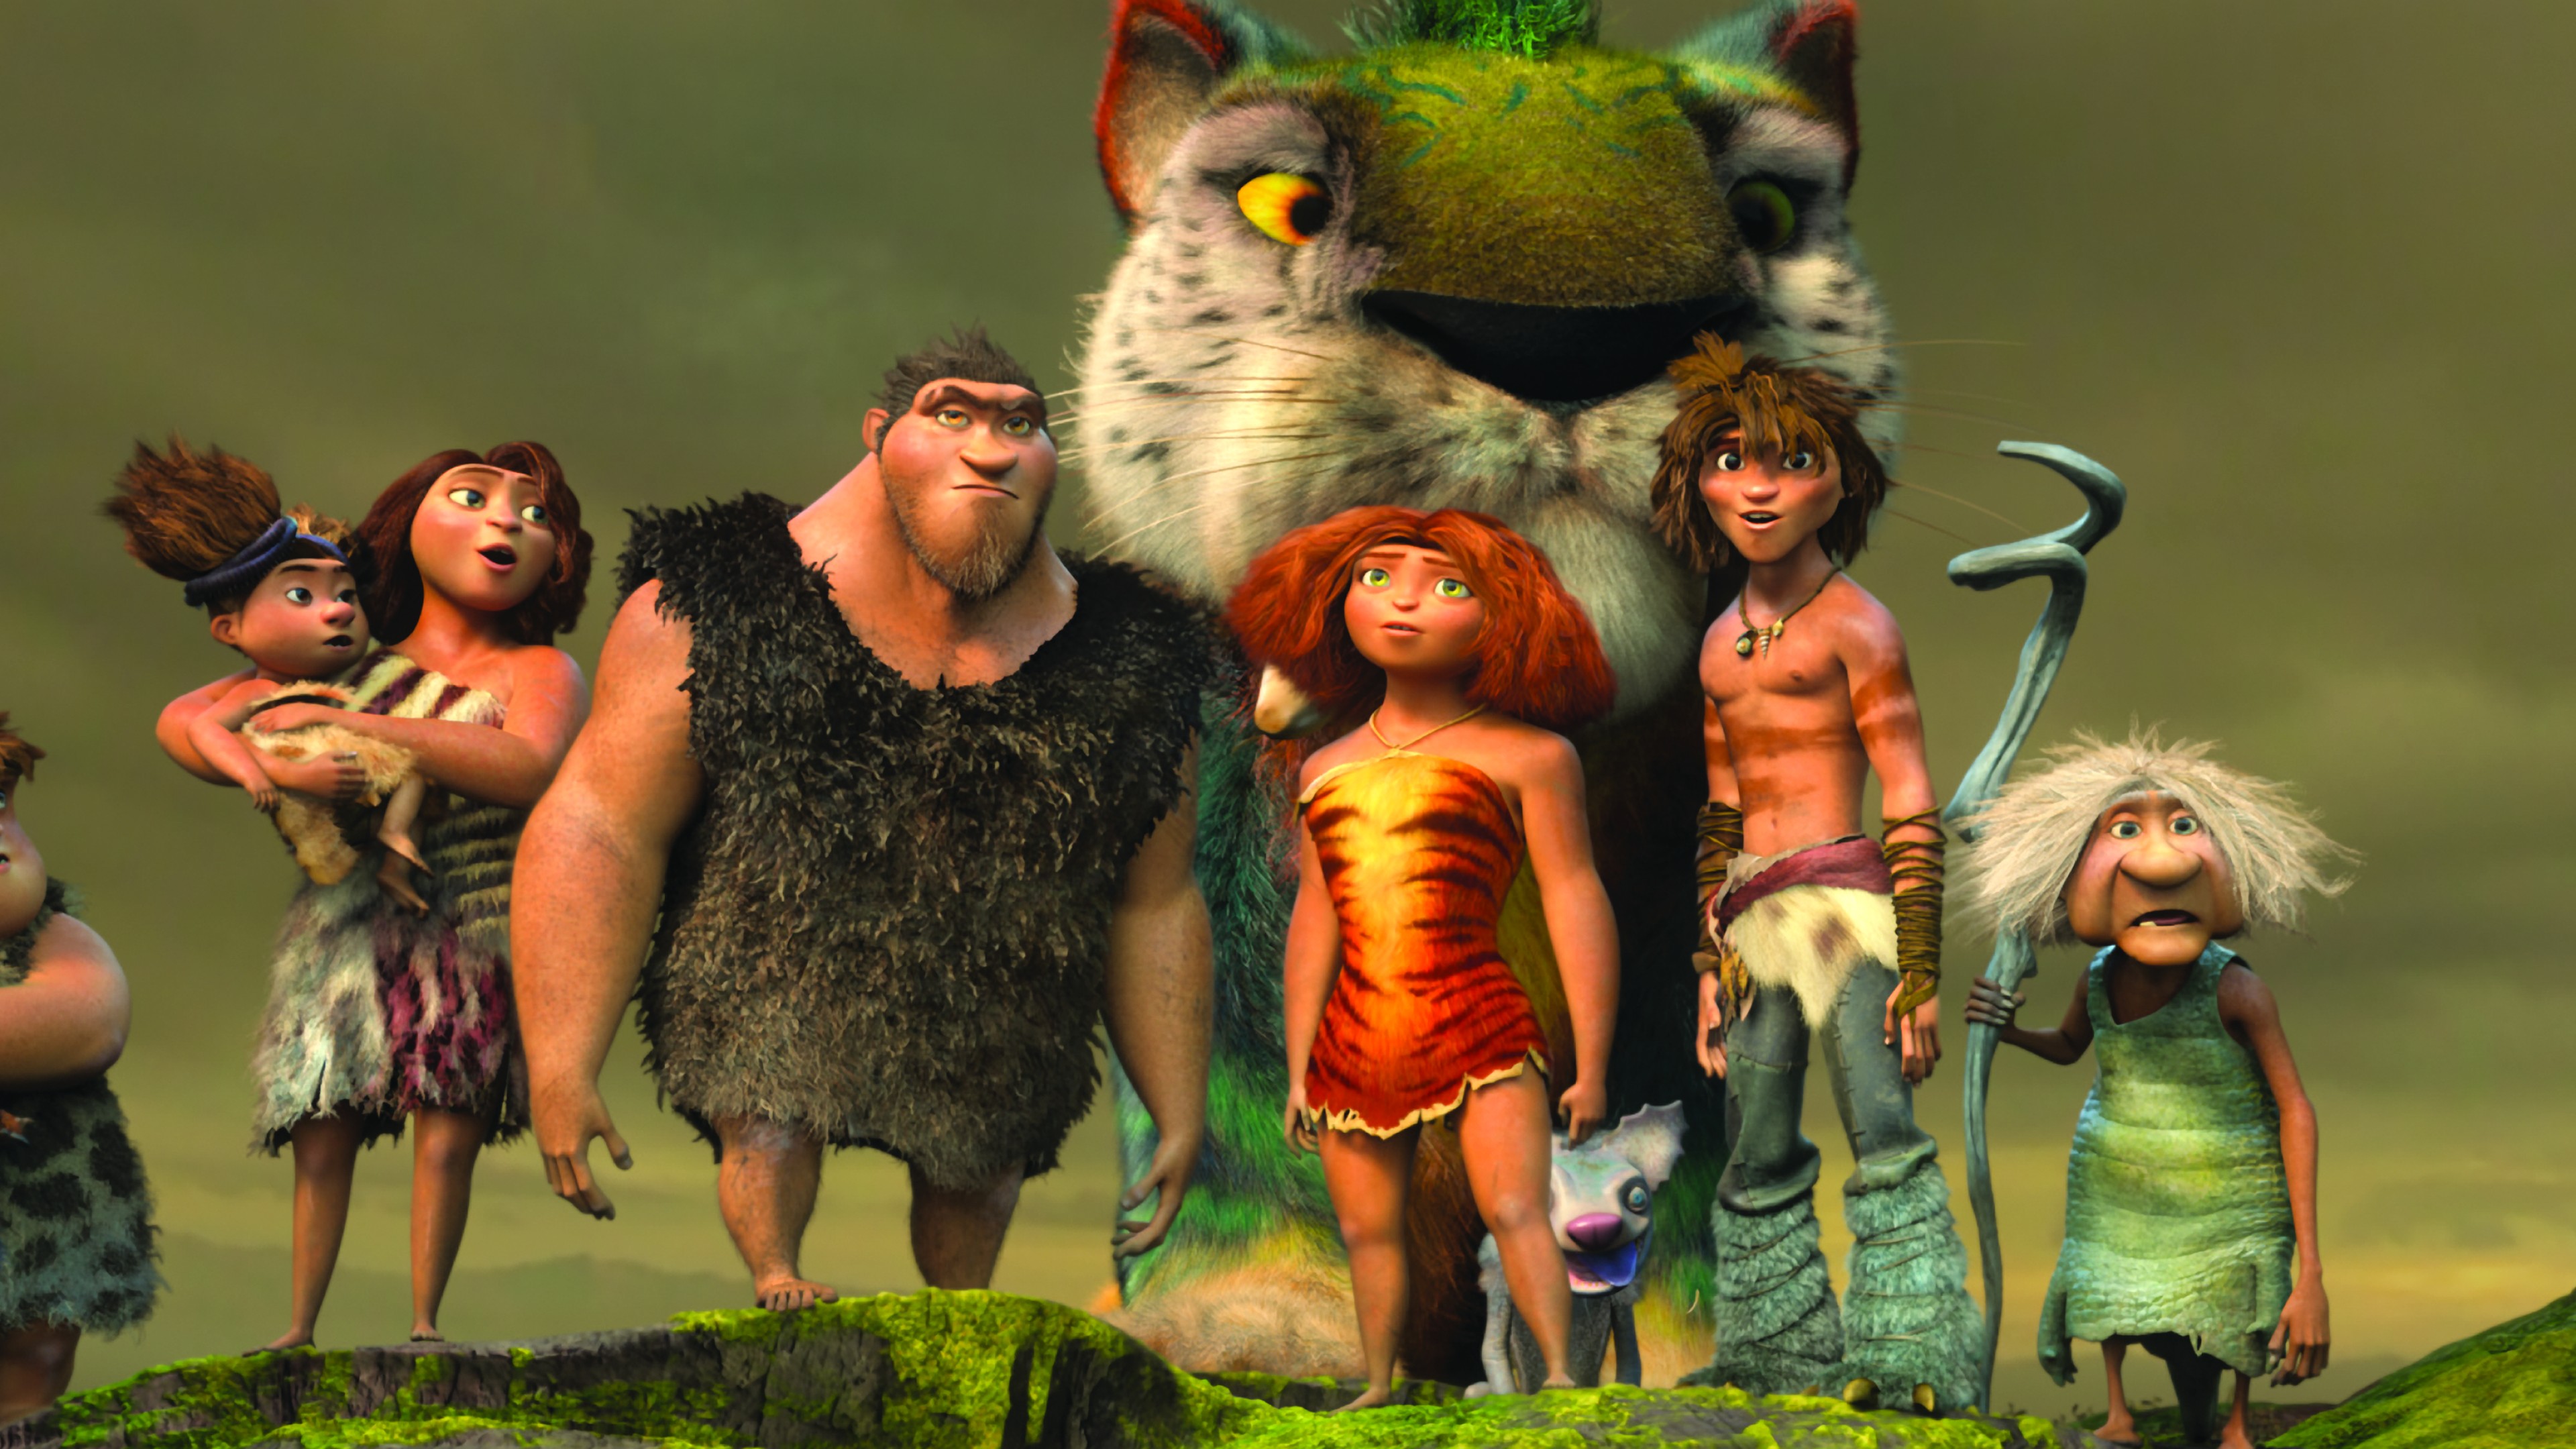 The Croods Wallpapers